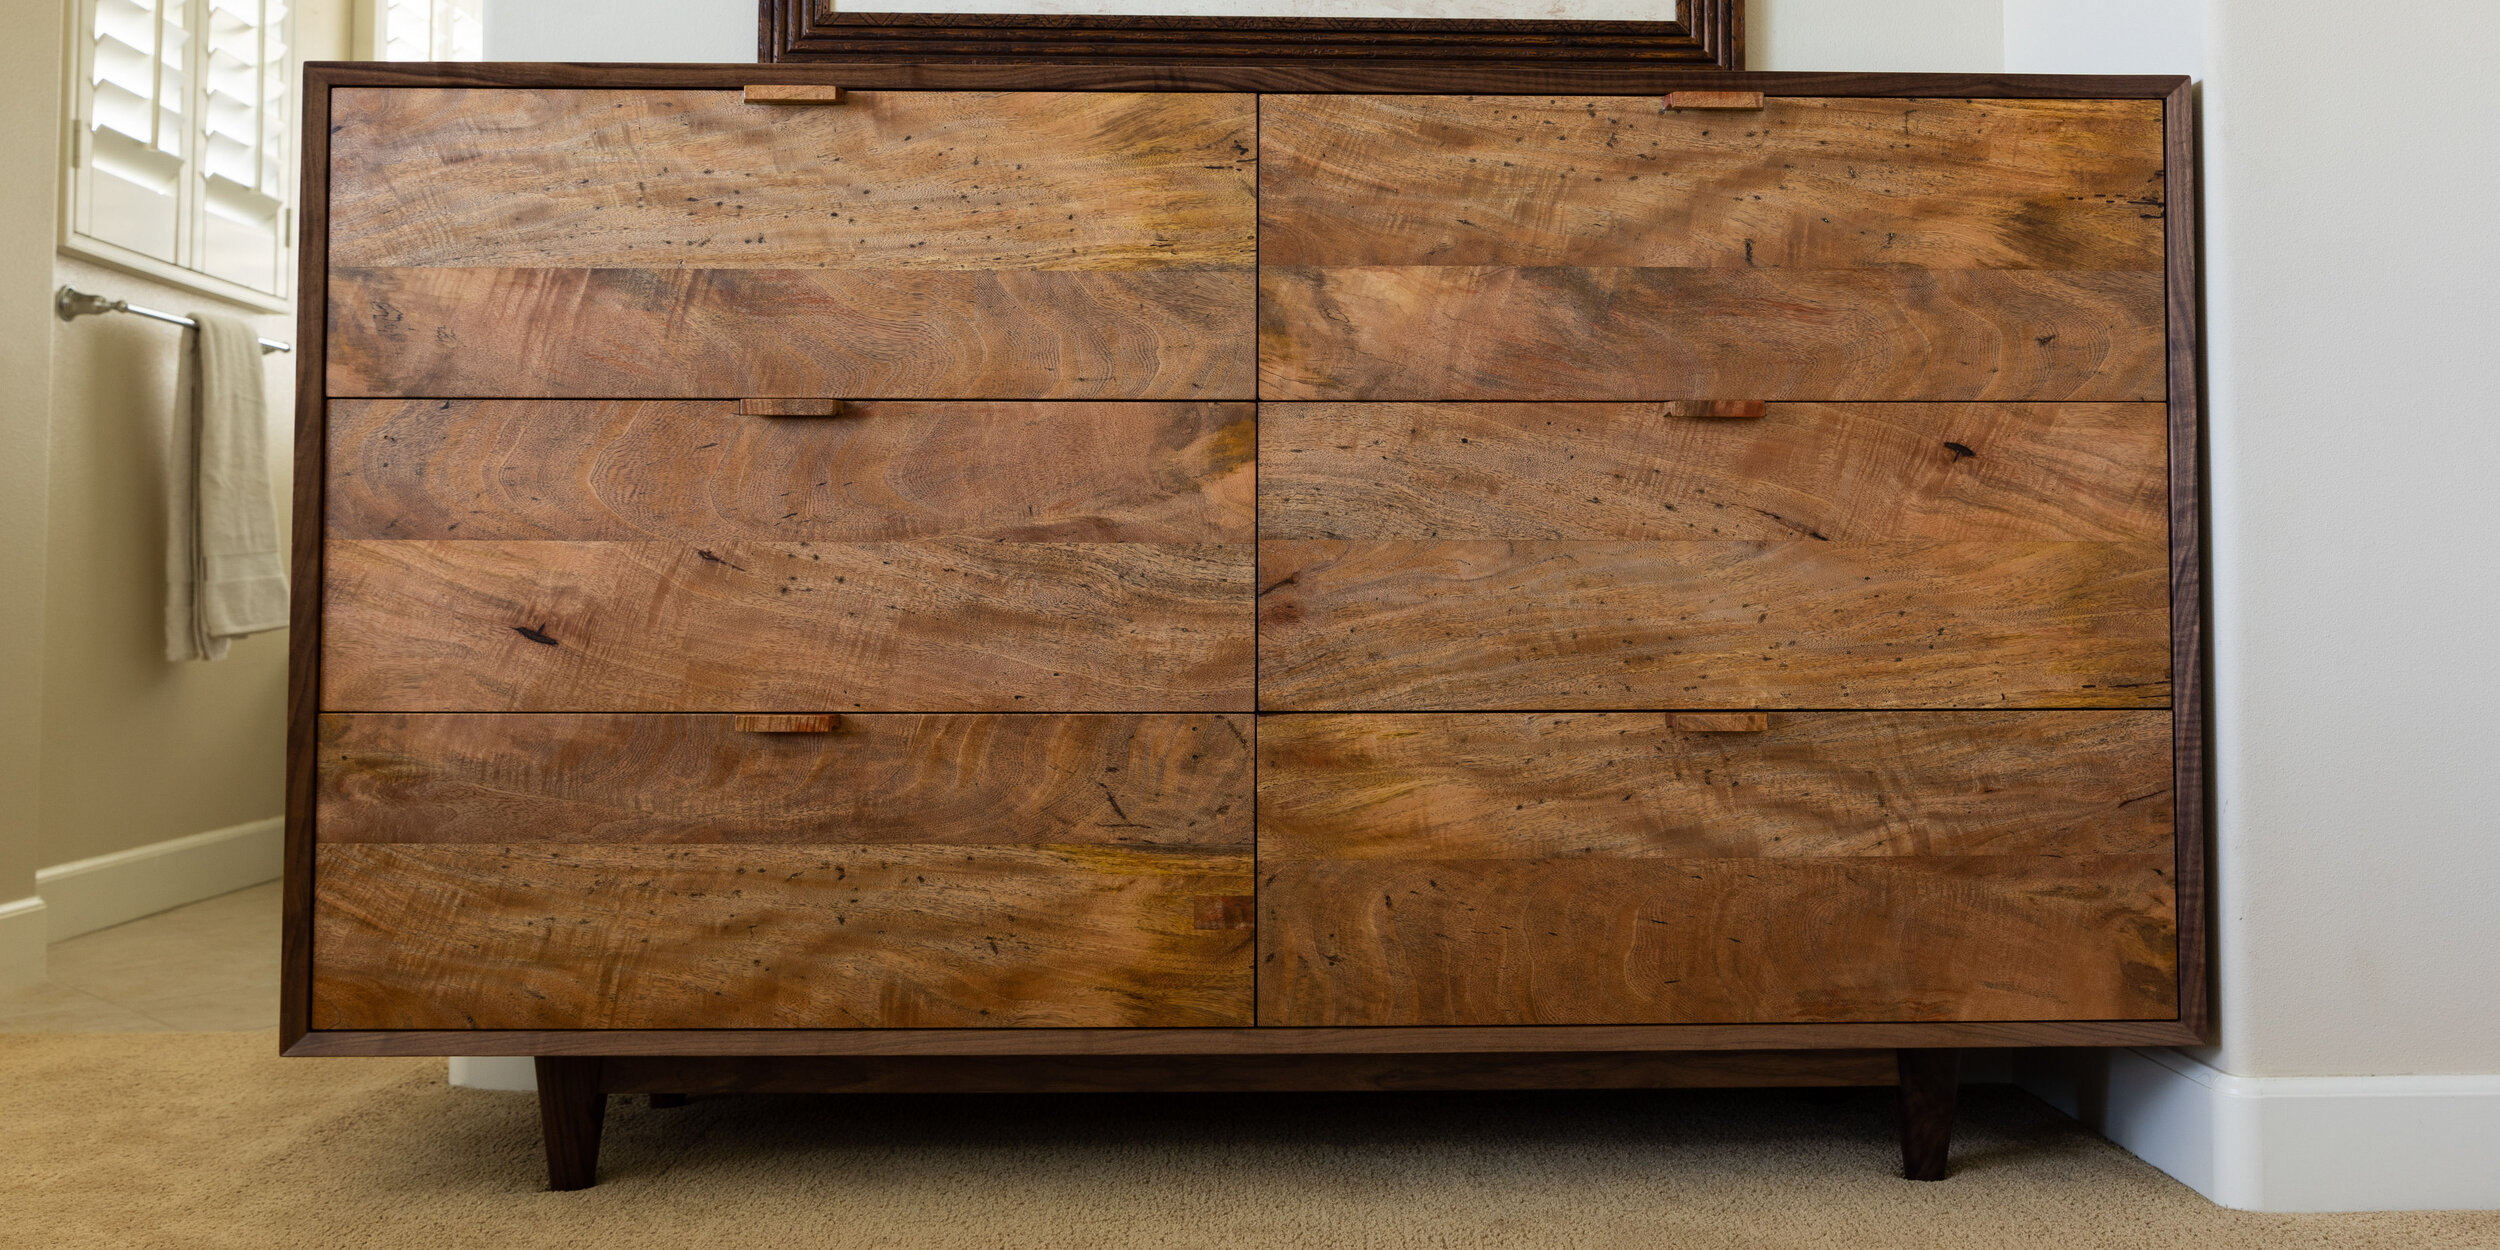 Mango drawer fronts with walnut casework